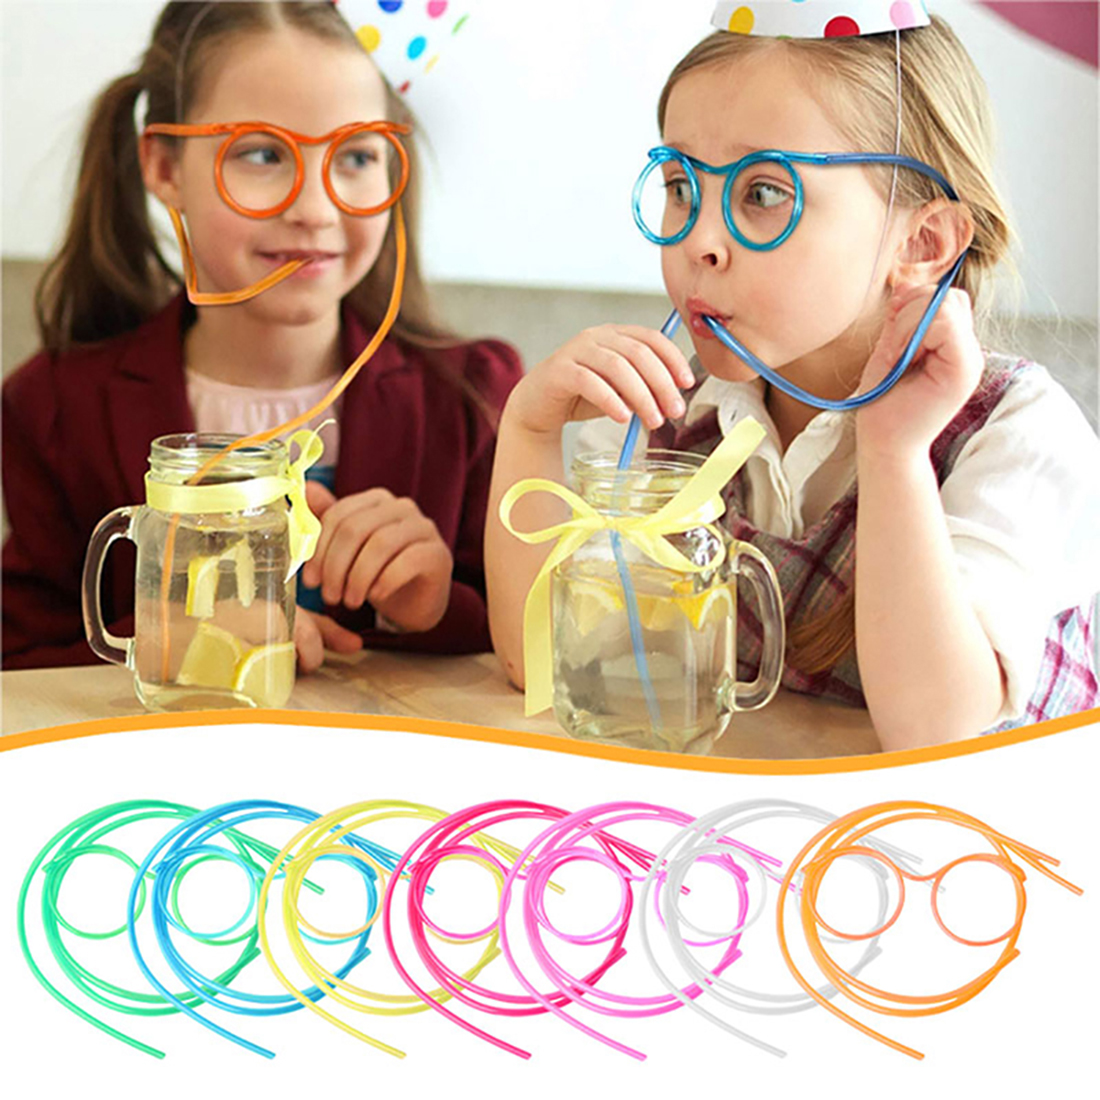 4 Pieces Silly Straws, Novelty Flexible Soft Drink Eyeglasses, Fun Party  Drinking Straw Eye Glasses, Crazy Funky Drinking Tube For Party Supplies,  Chi